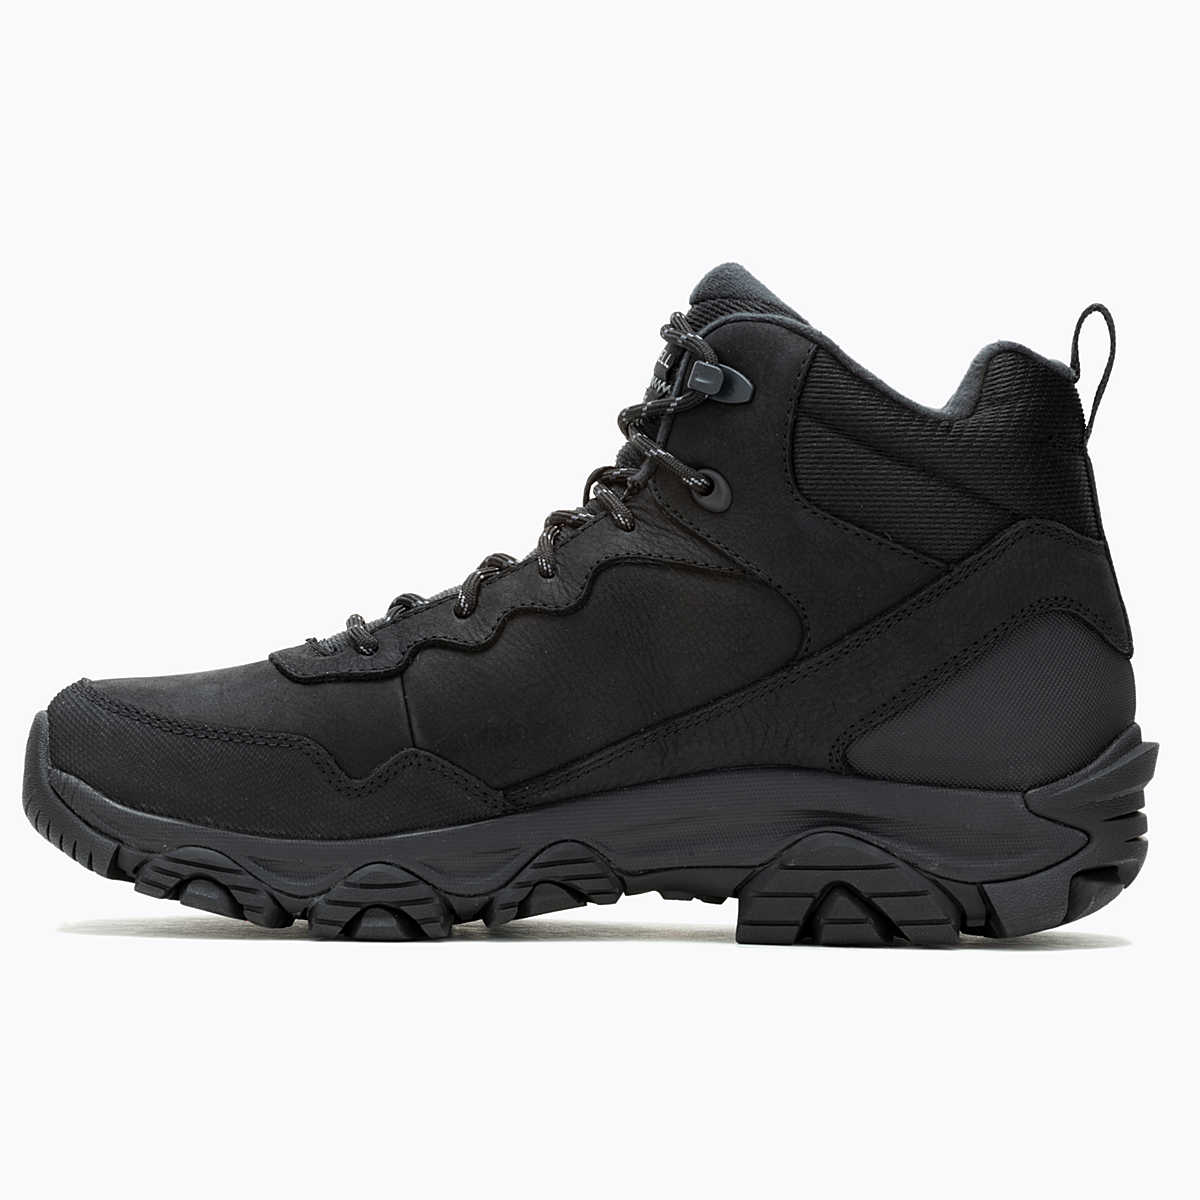 Merrell - Coldpack 3 Thermo Mid Waterproof - Black Leather